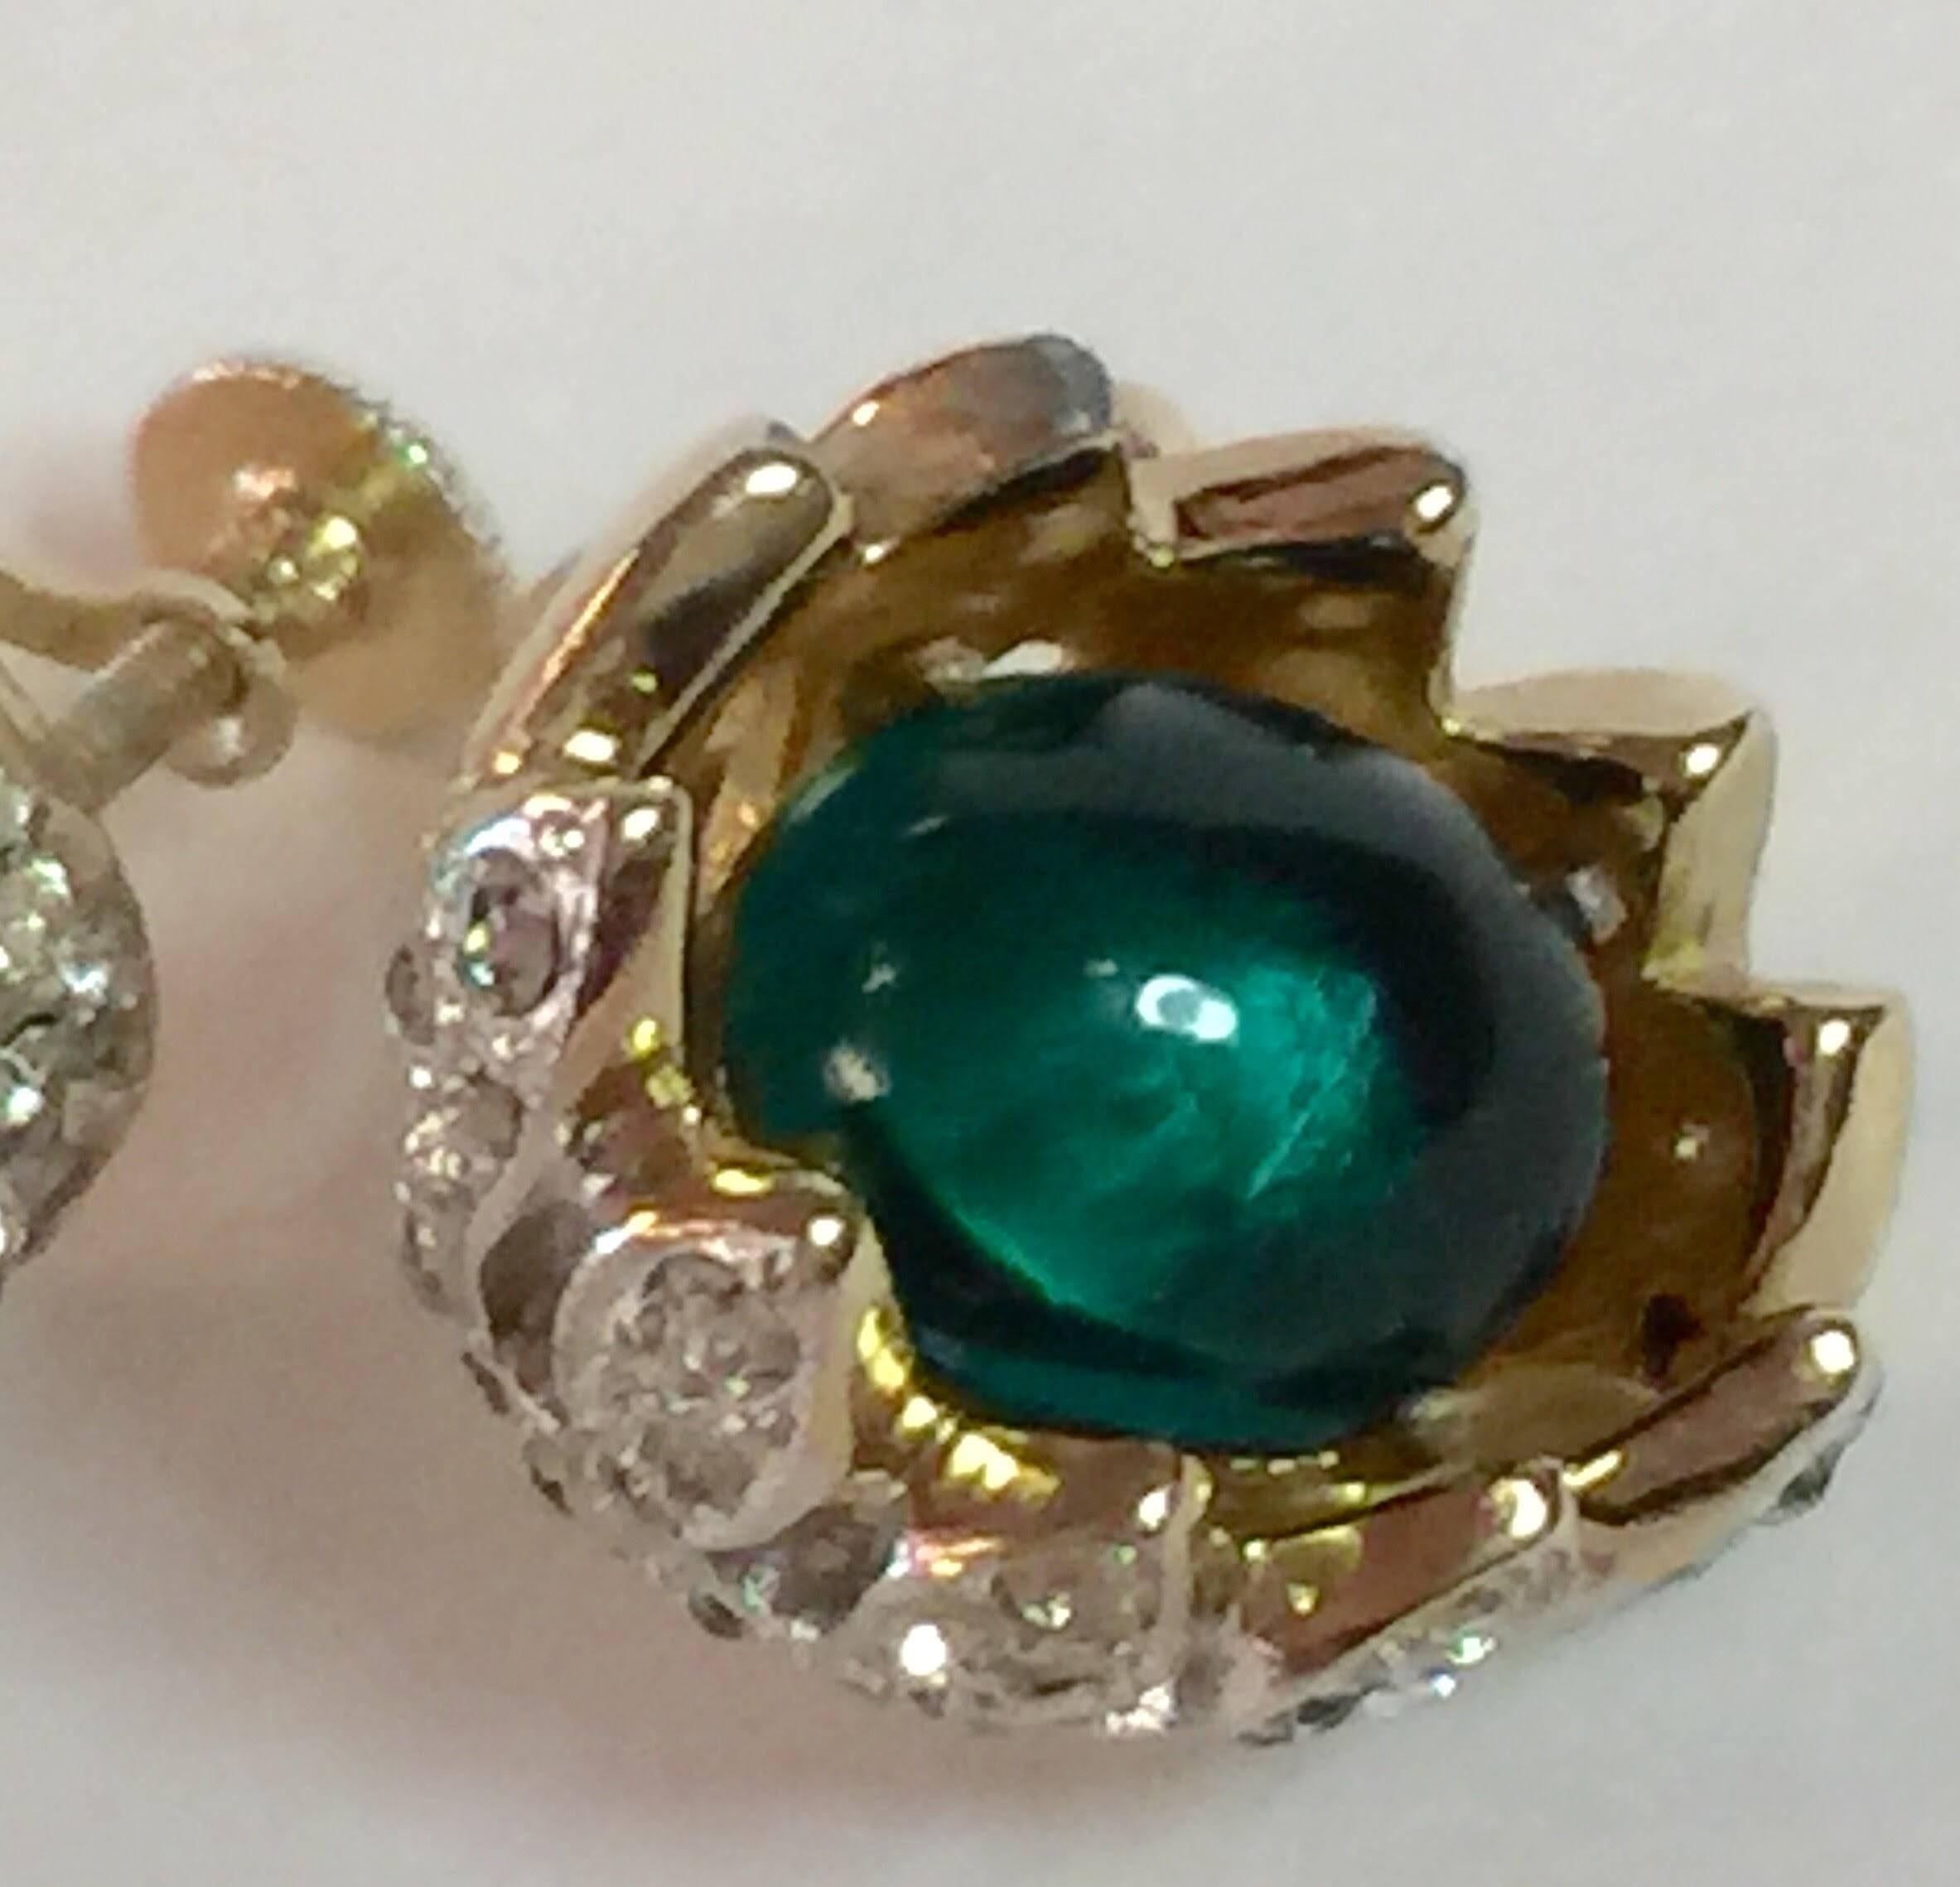 CoroCraft Goldtone Carmen Miranda Screwback Camellia Bud Green Cabochon Earrings In Excellent Condition For Sale In Palm Springs, CA